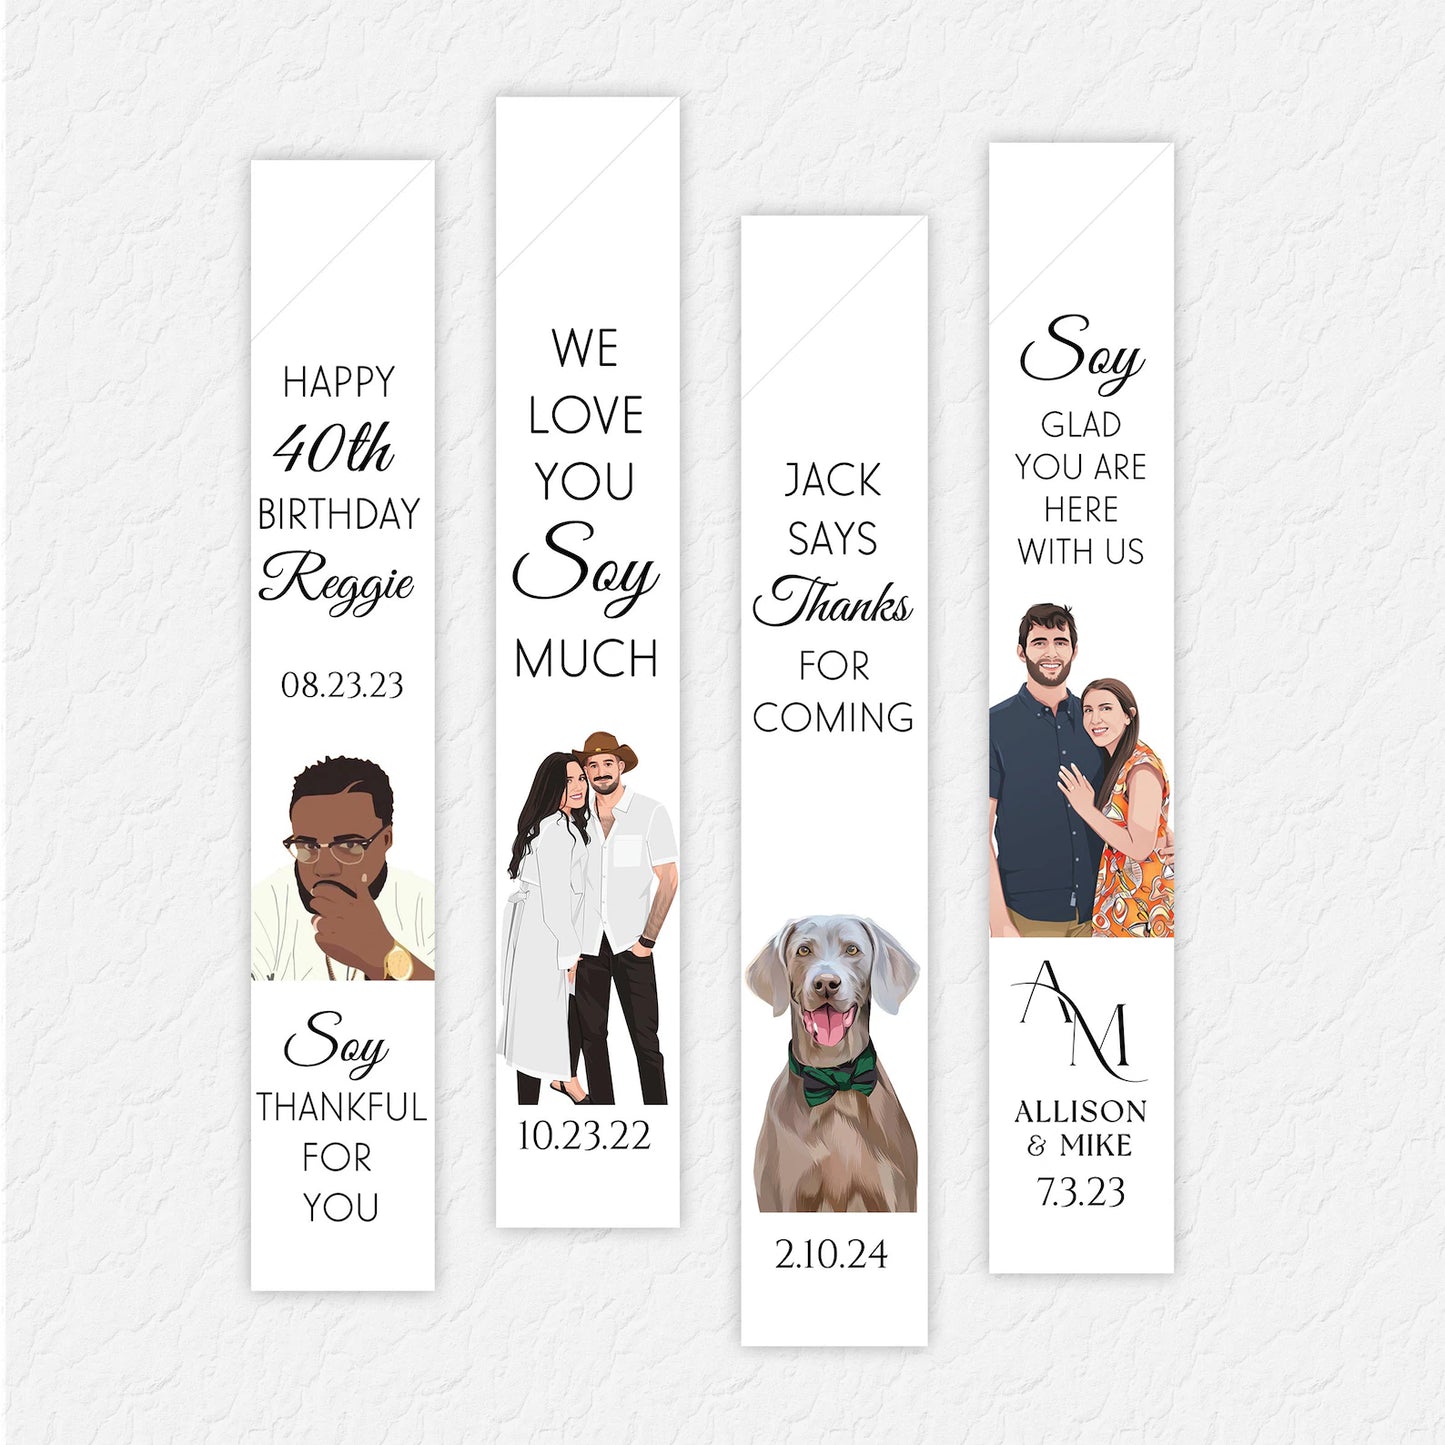 Personalized Wedding Chopstick Sleeves with Couple Illustration